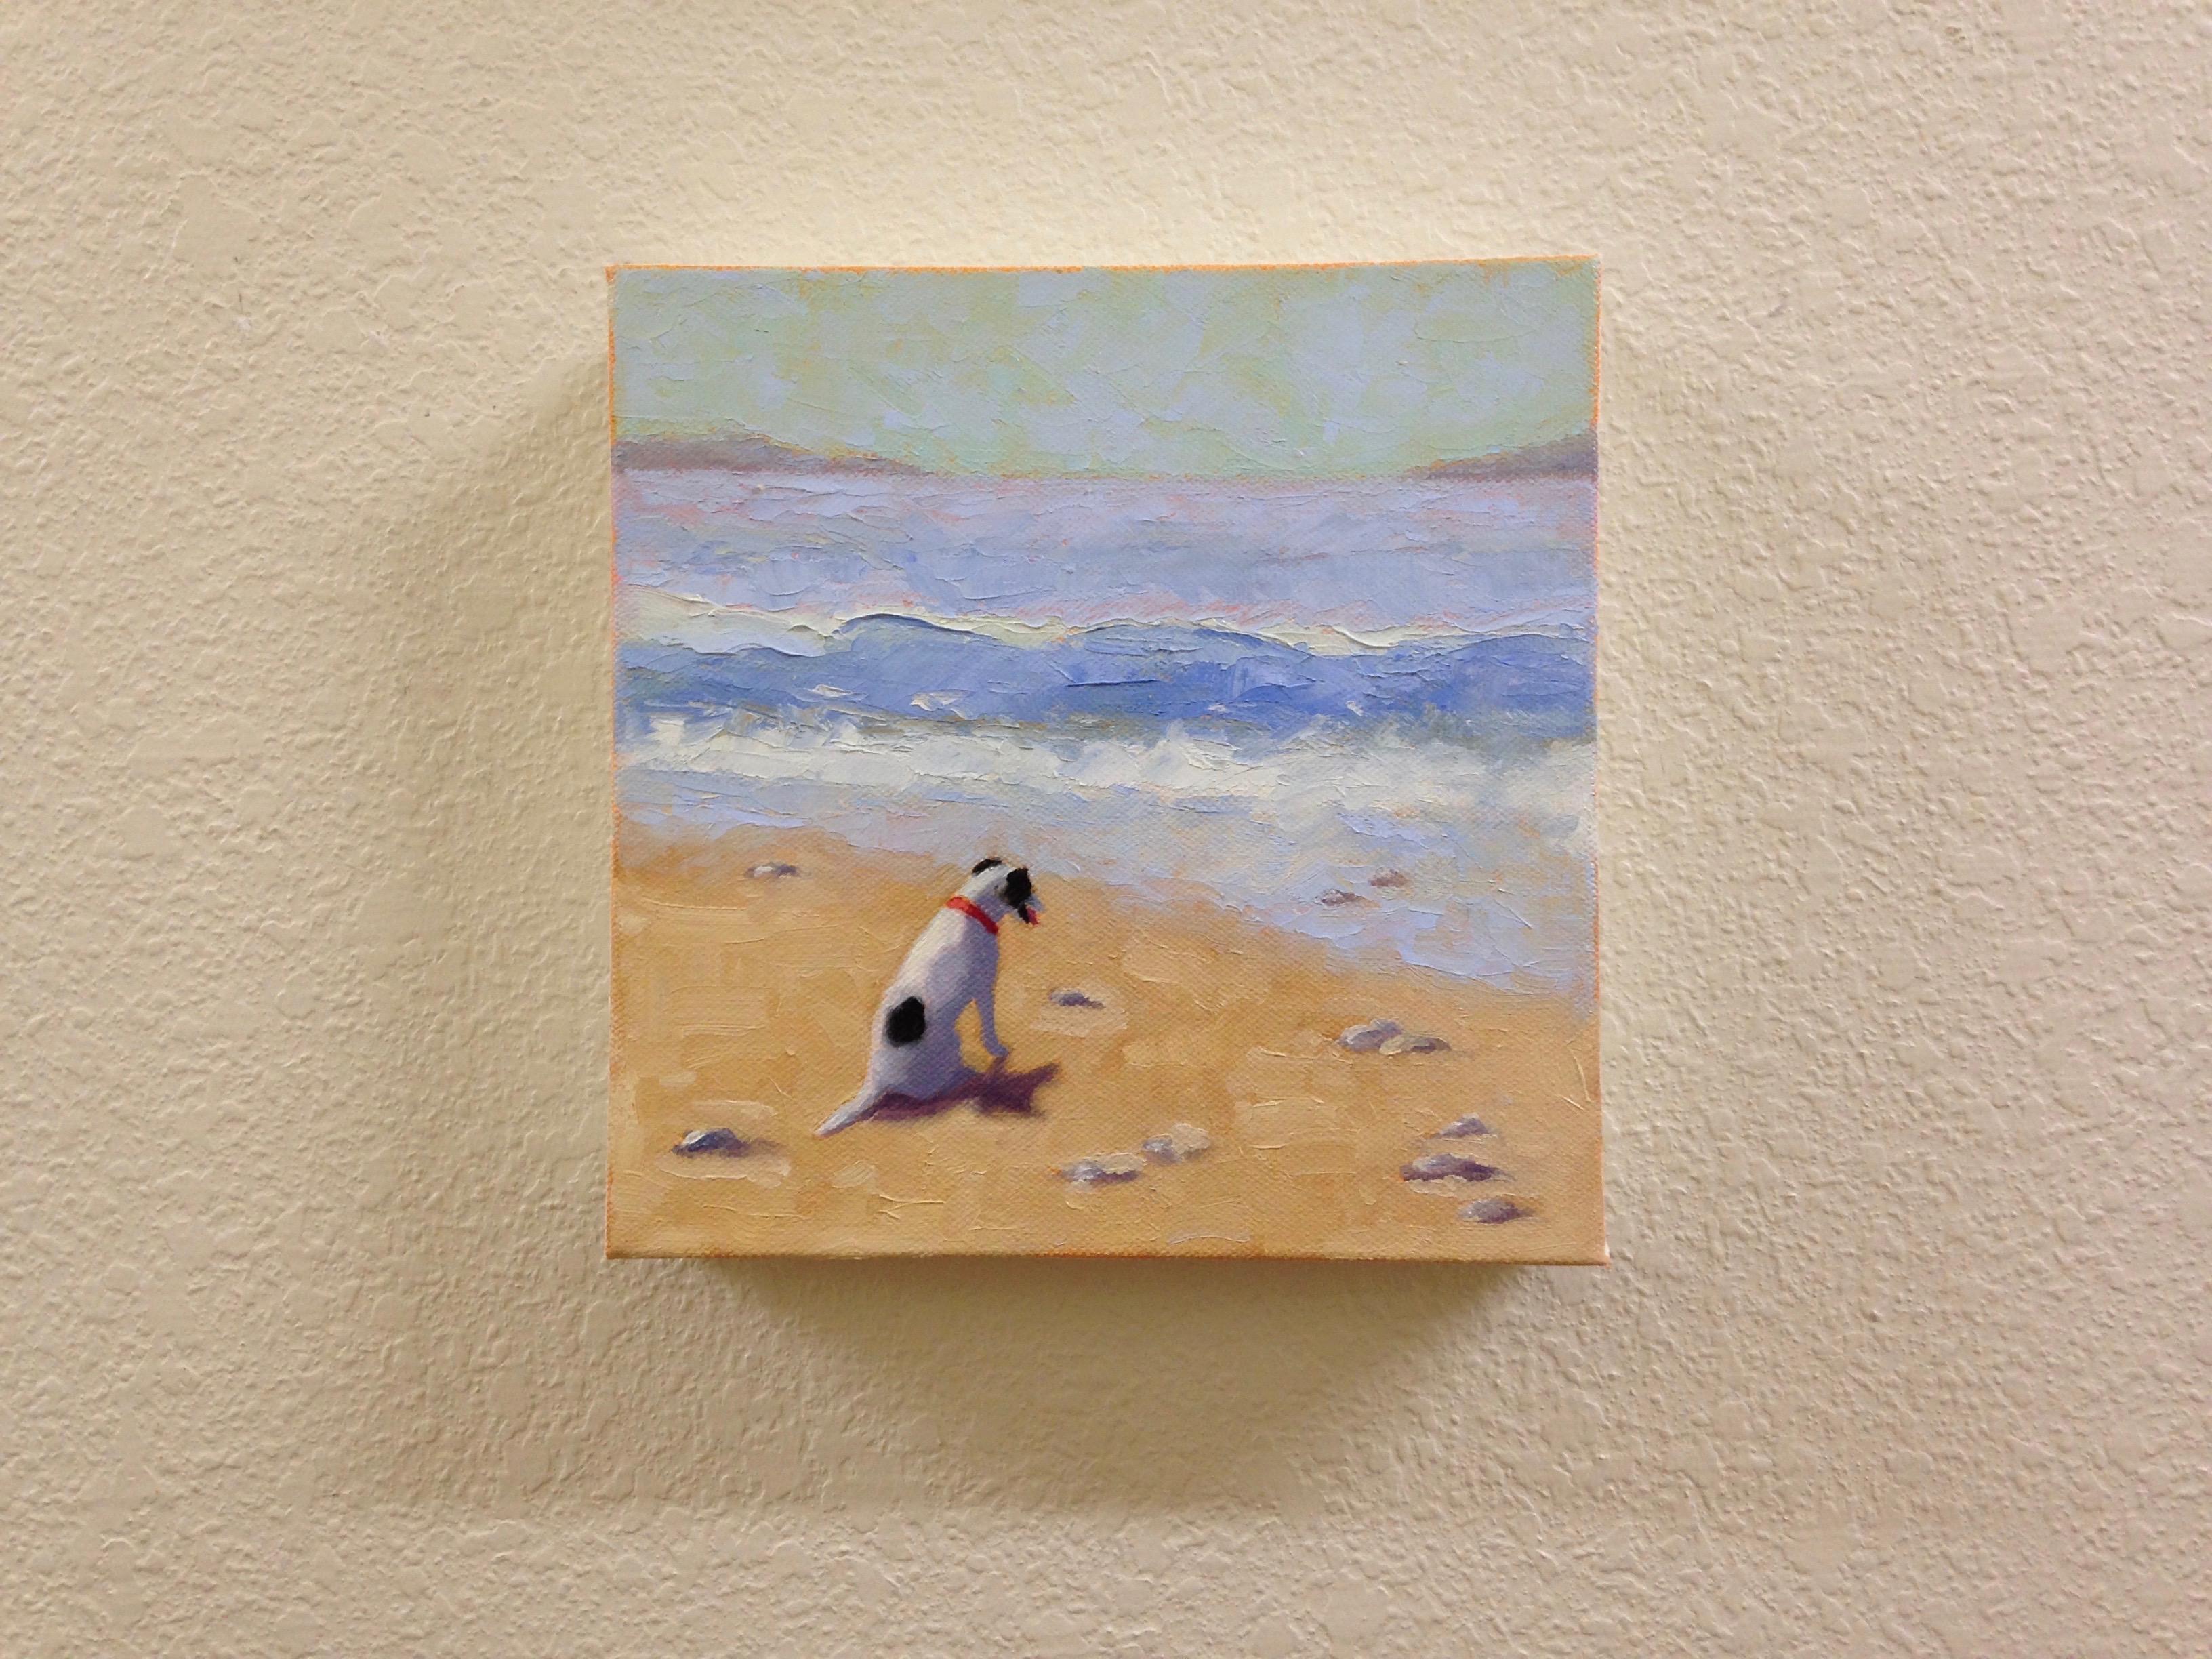 <p>Artist Comments<br />A black and white dog calmly sits on the beach gazing at the surf. Artist Pat Doherty draws attention to the warm colors in the scene by simplifying the details. 